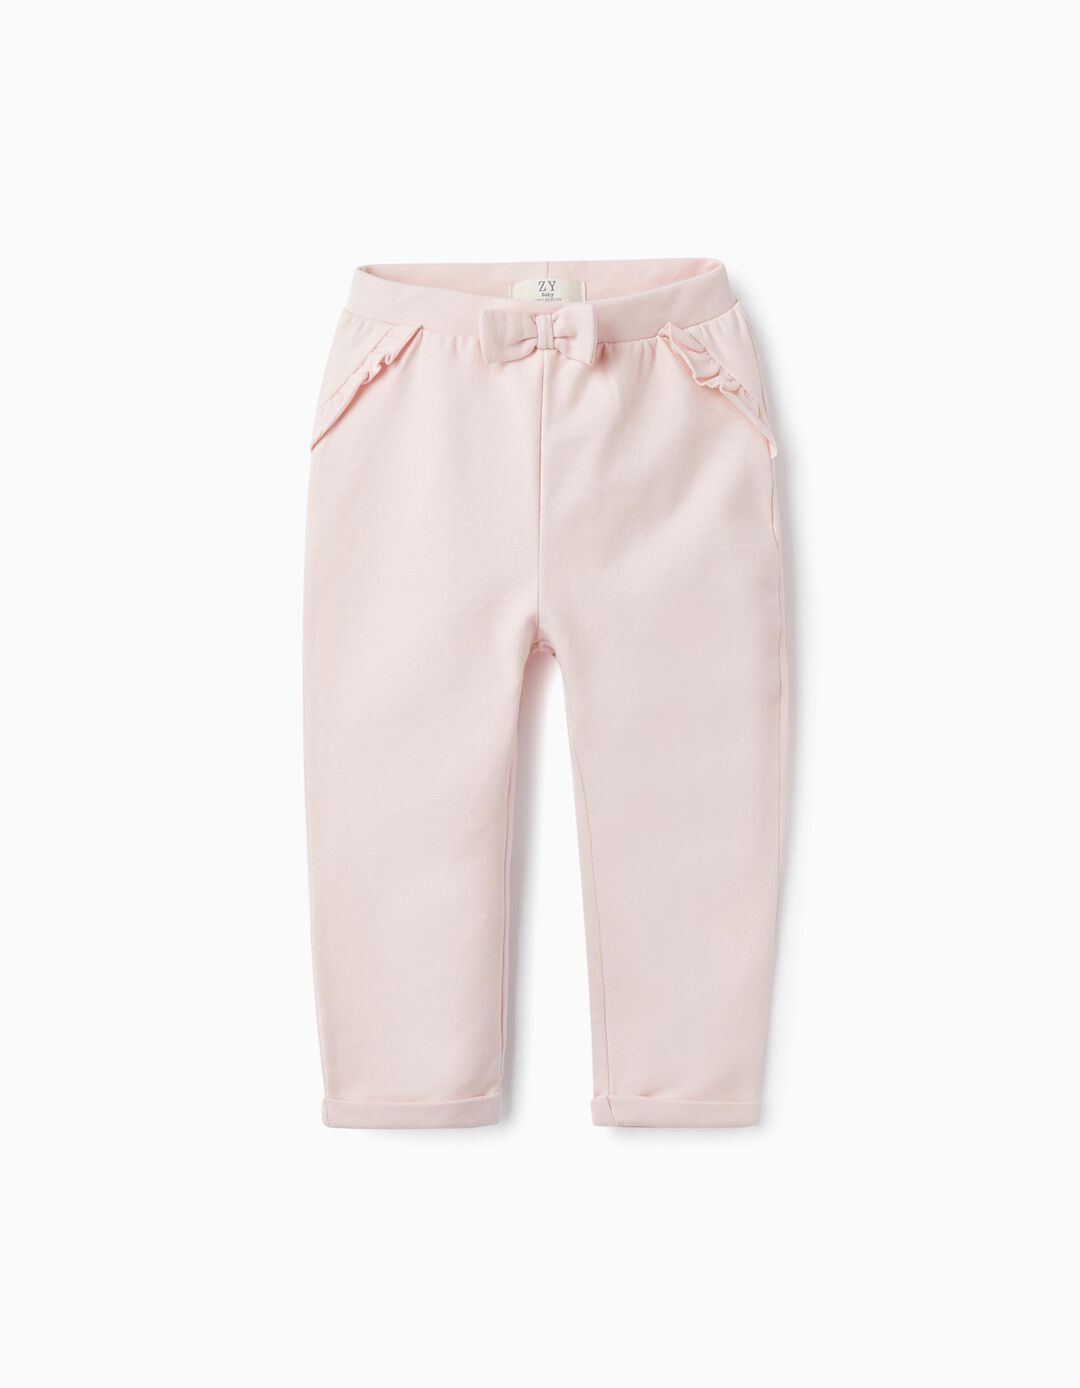 Cotton Pants with Ruffles and Bow for Baby Girls, Pink